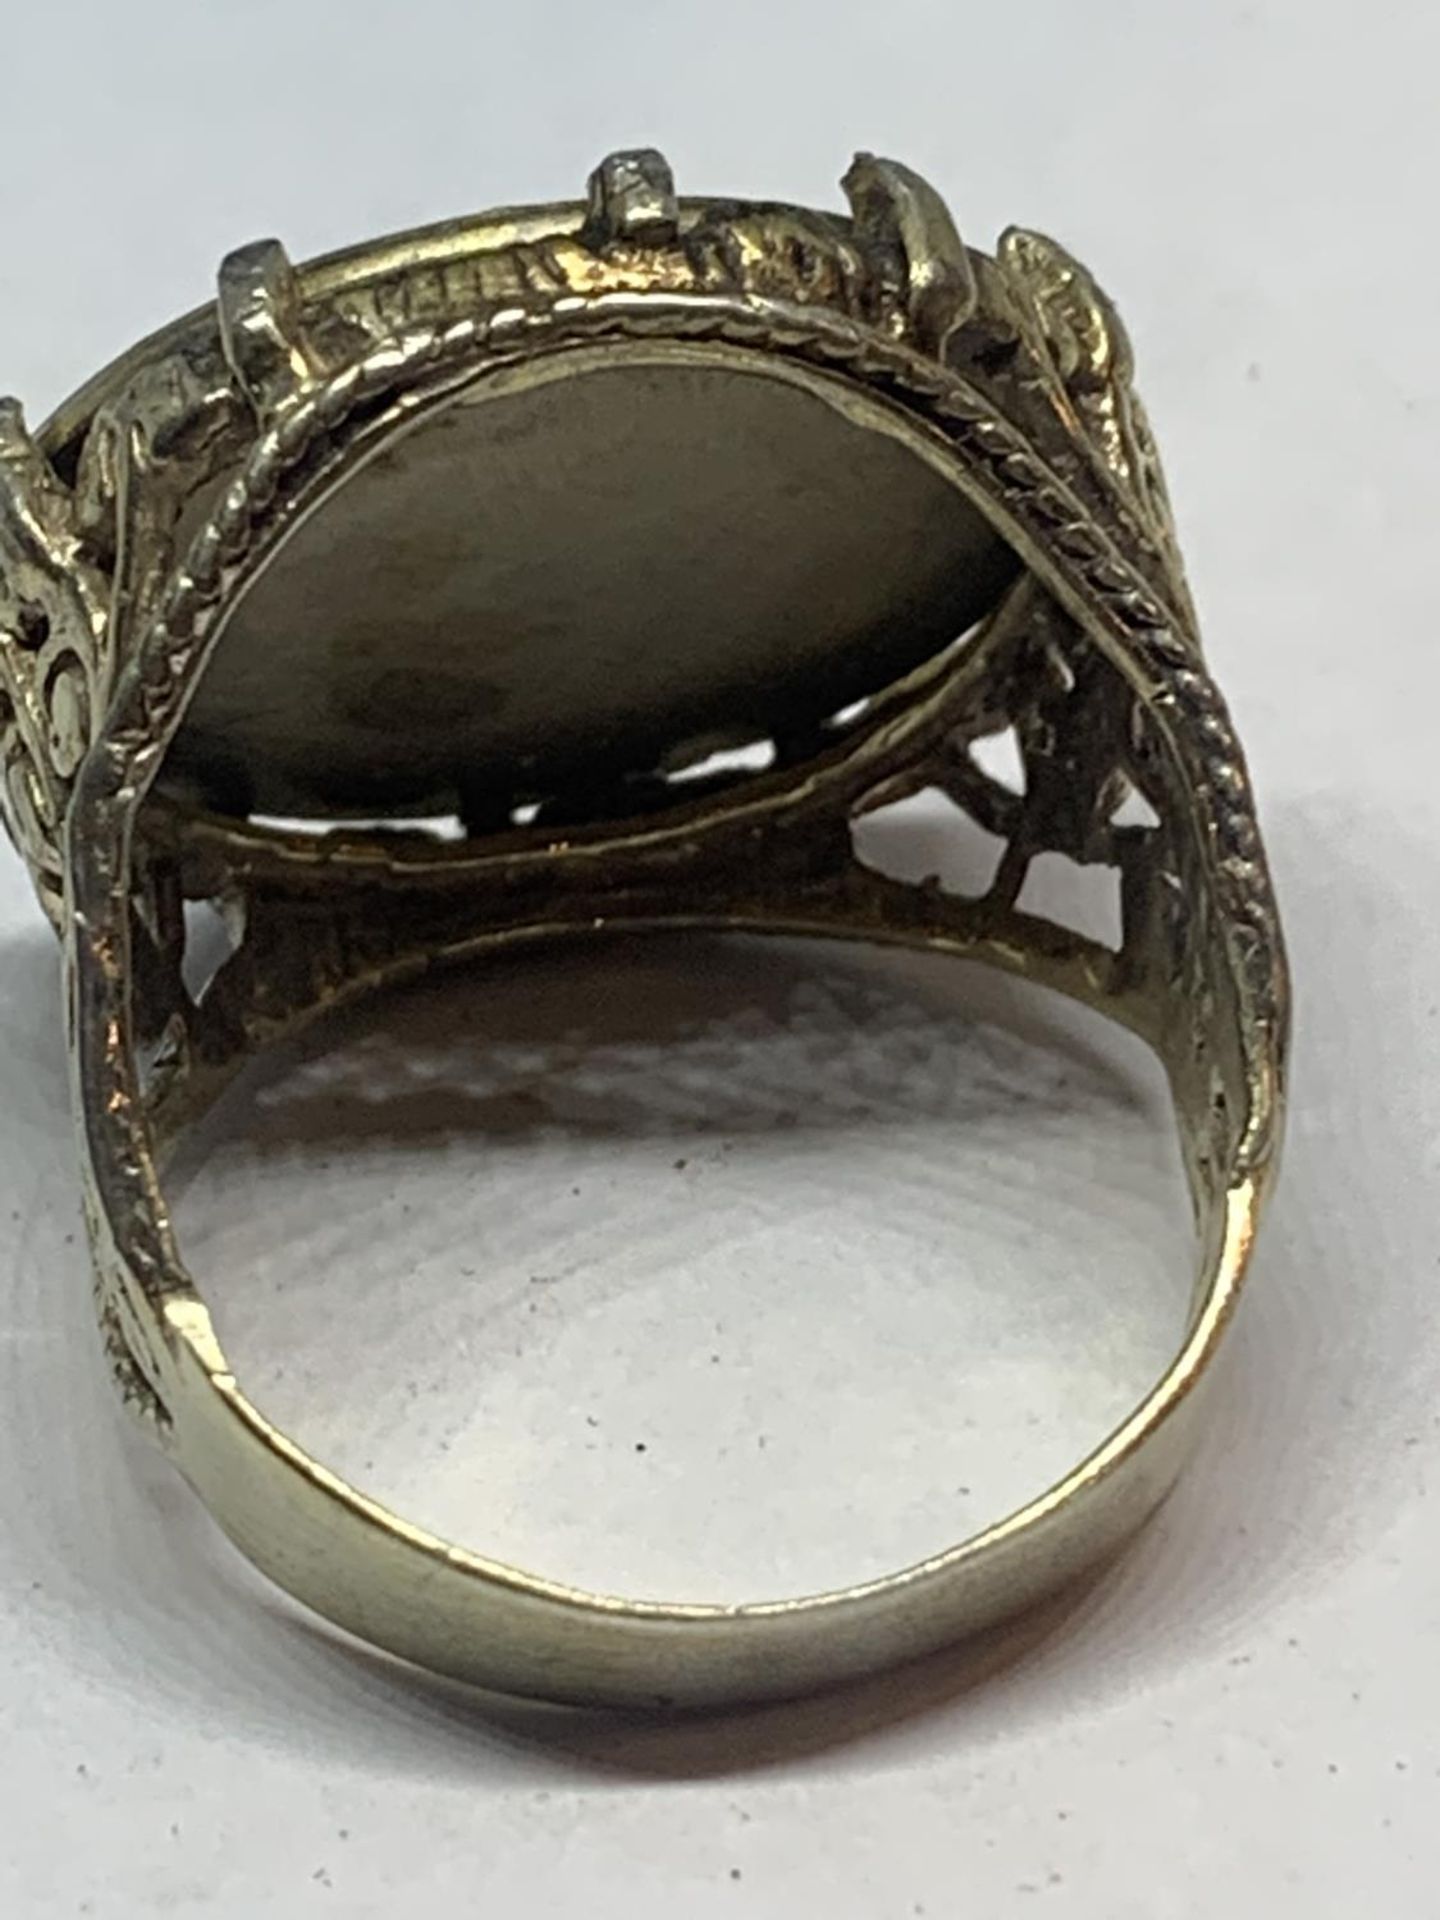 A SOVEREIGN STYLE RING IN A PRESENTATION BOX - Image 4 of 4